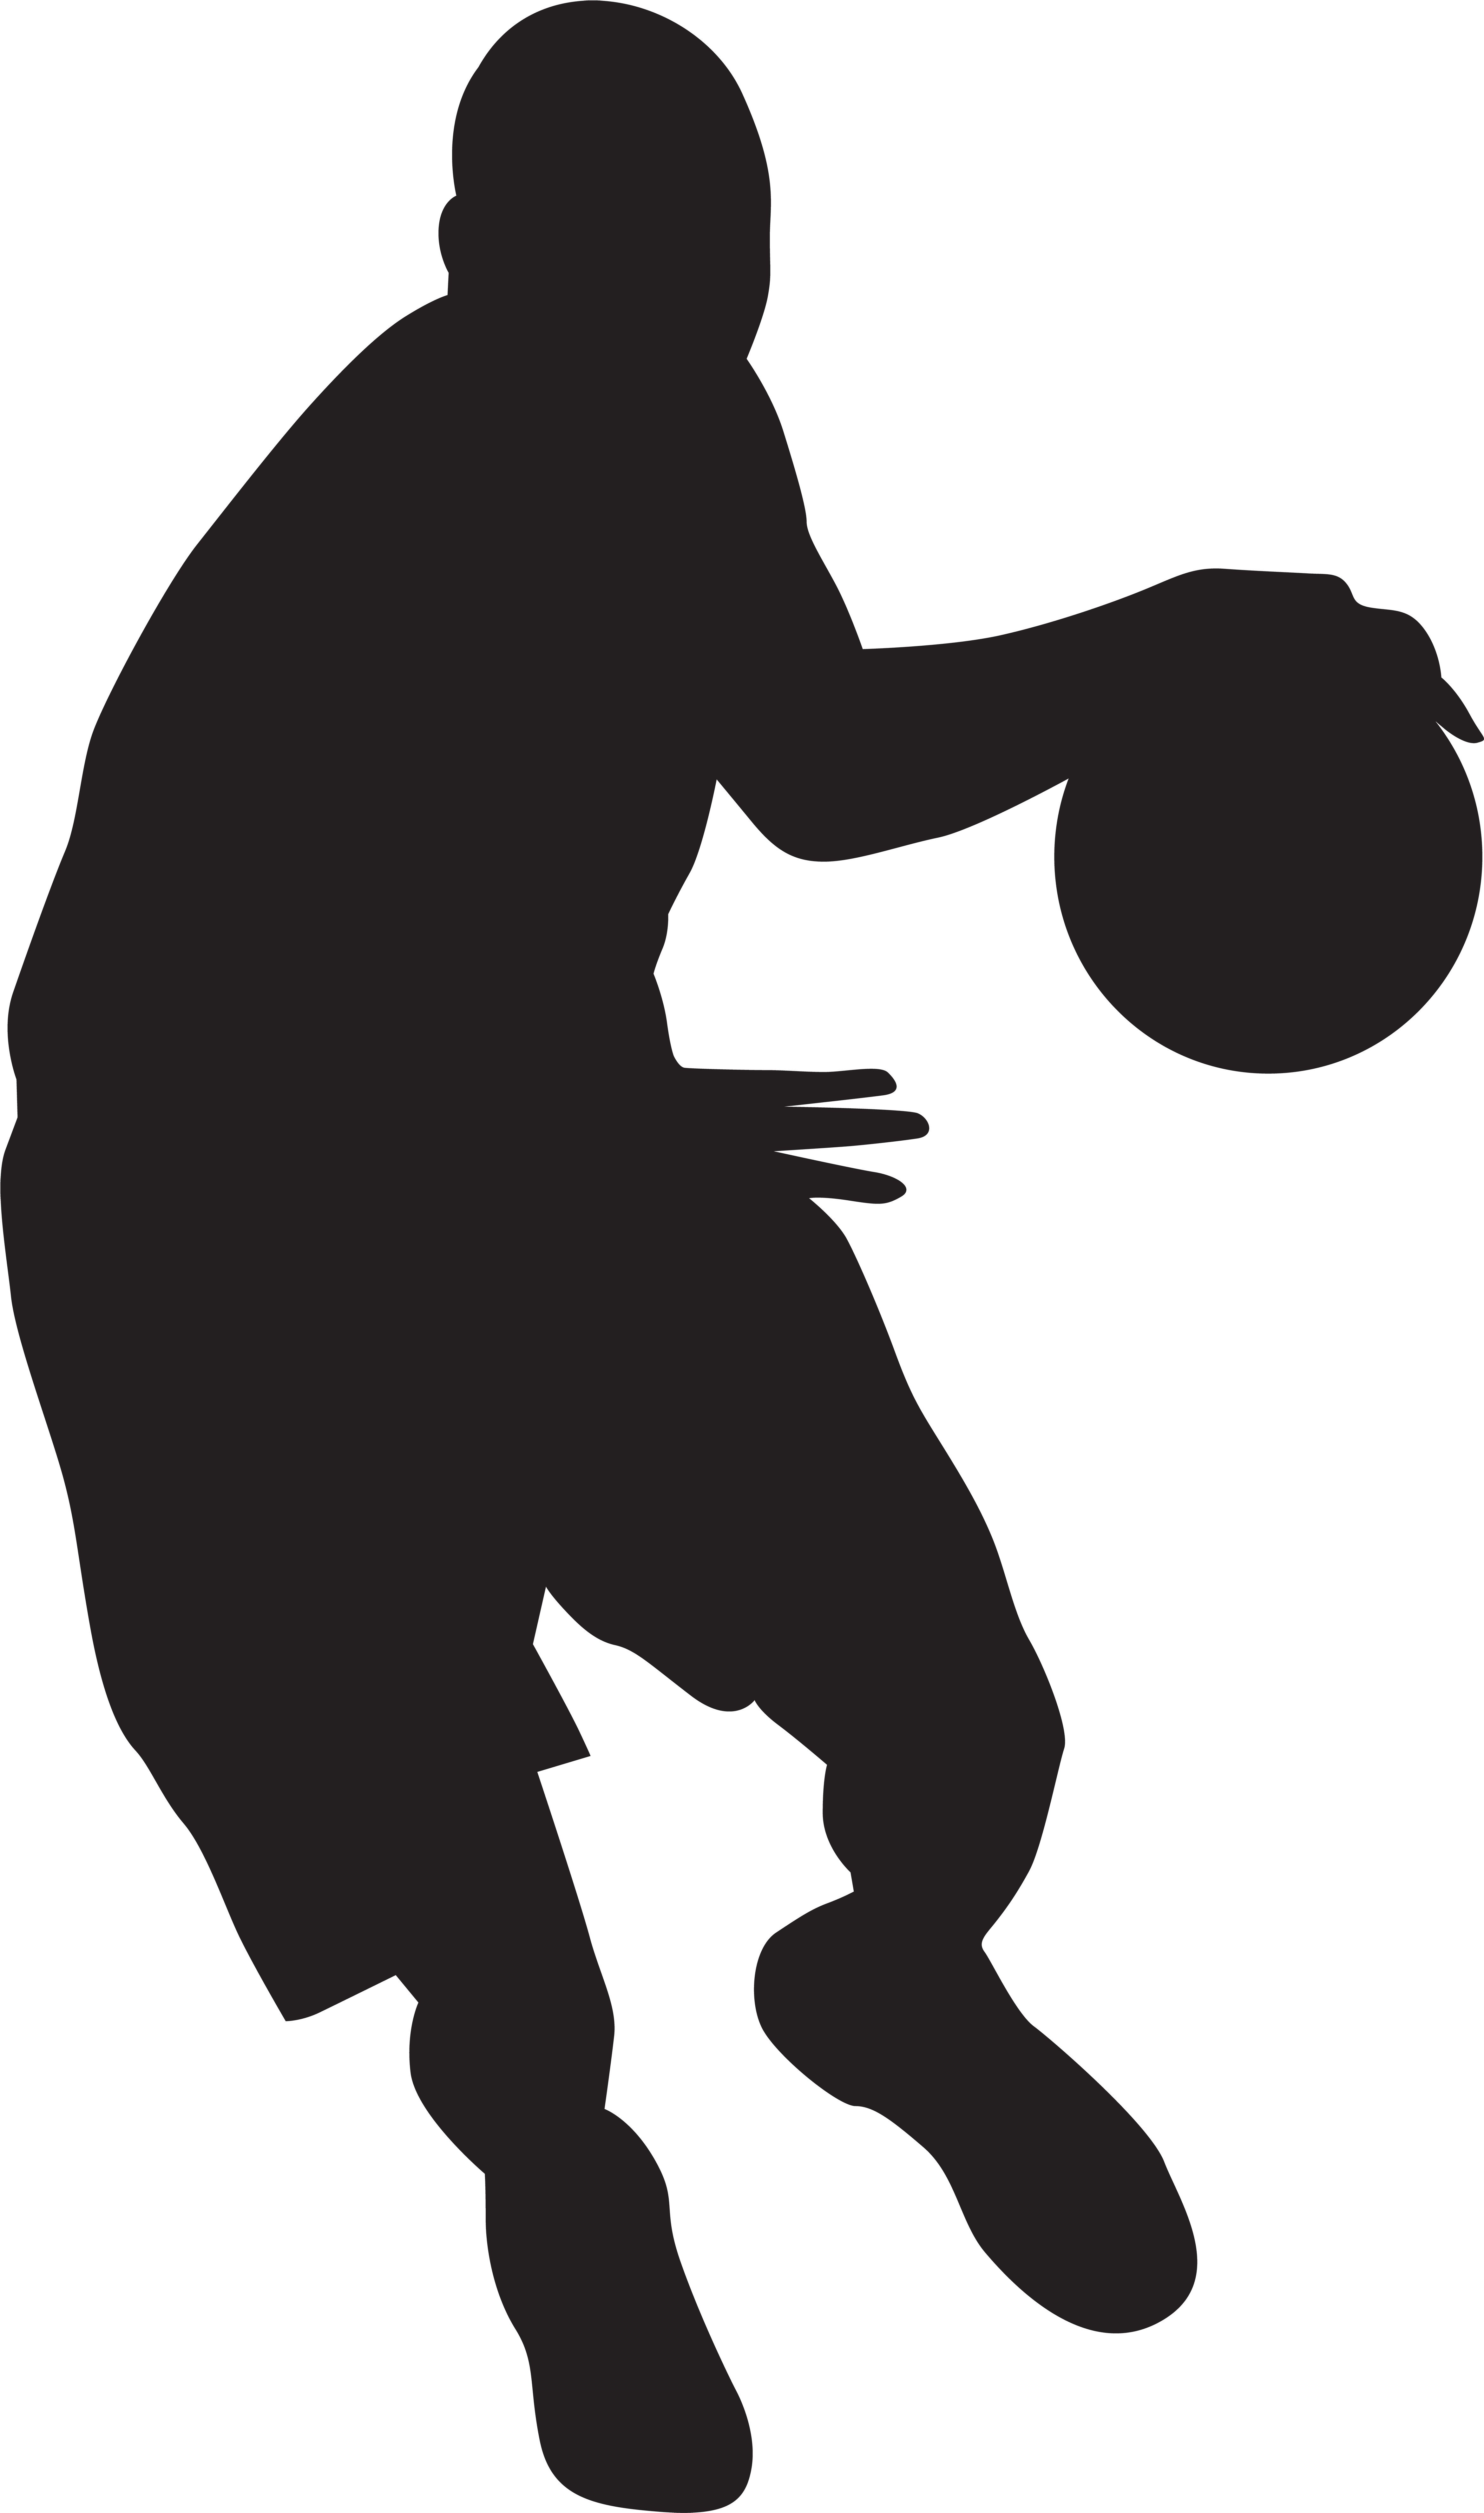 Basketball Player Silhouette Png Clip Art Imageu200b - Basketball Player Silhouette Png (4774x8000)